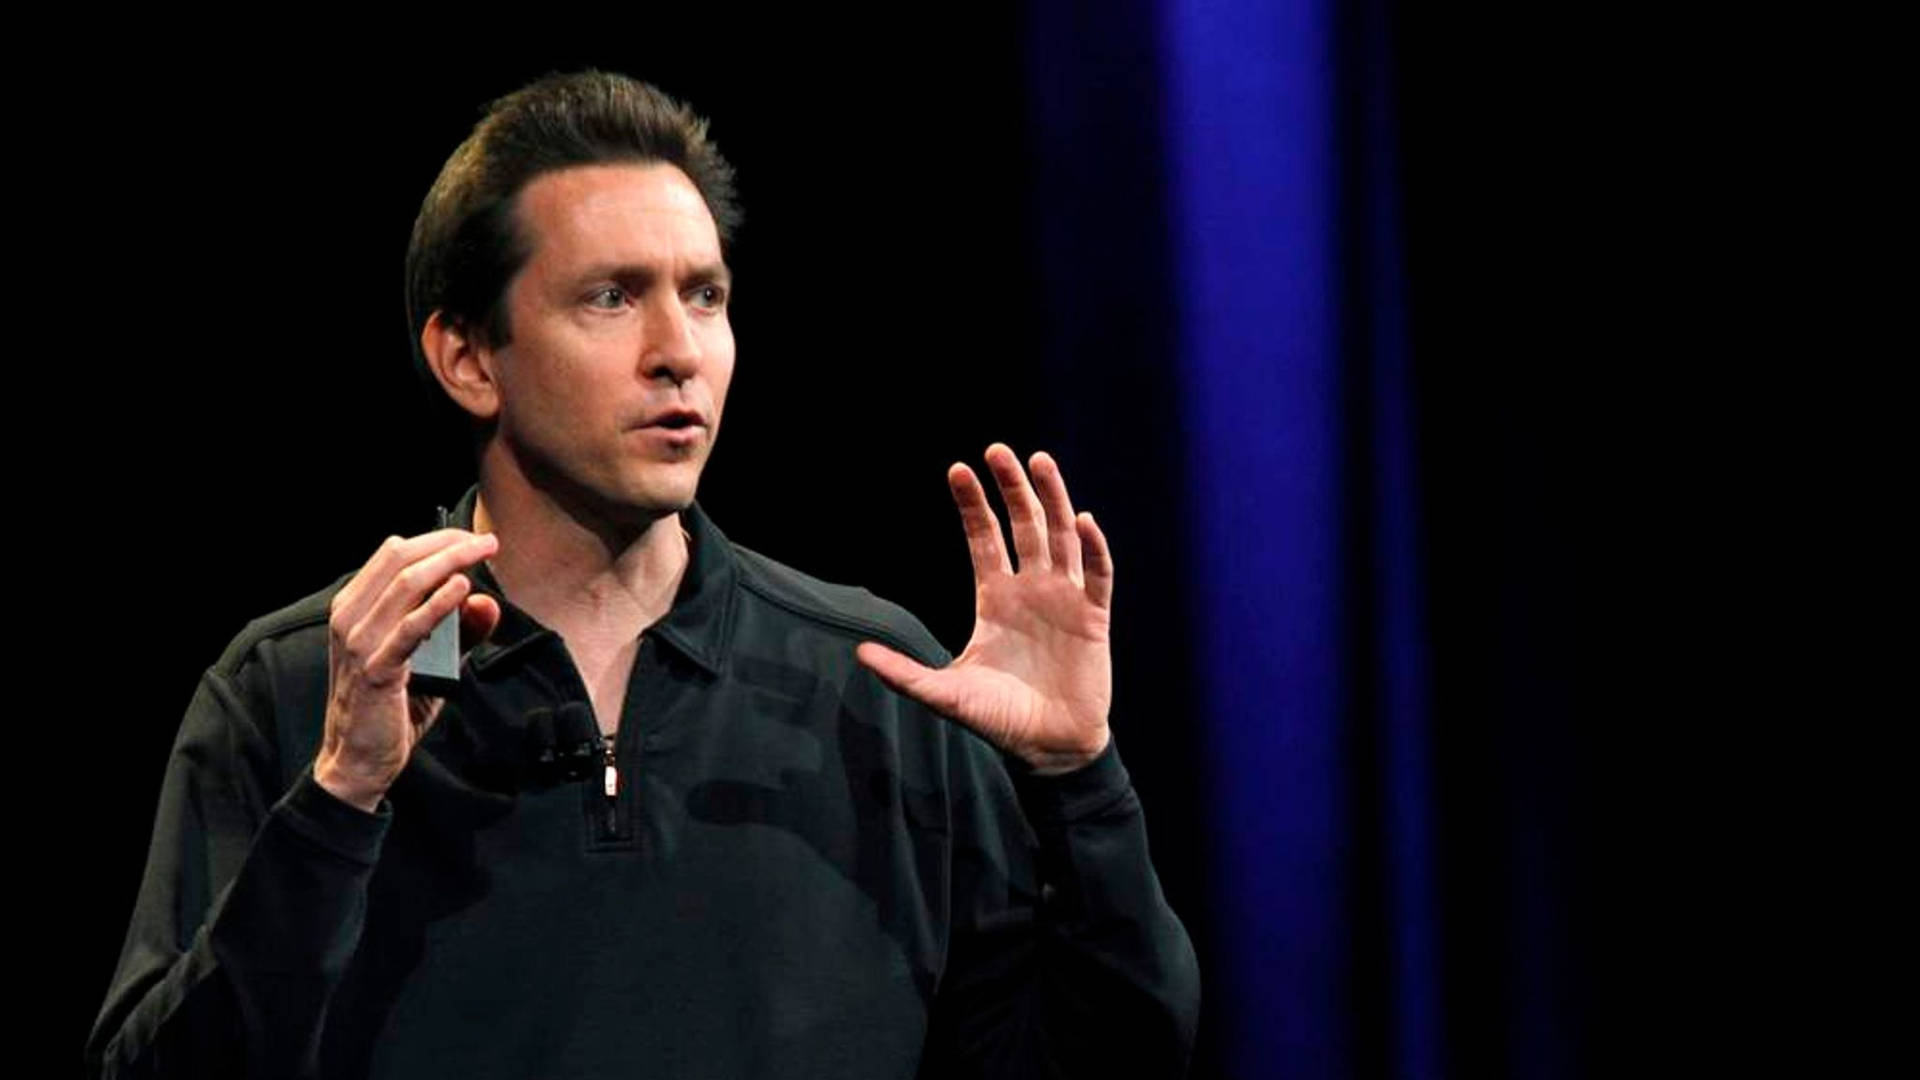 Scott Forstall passionately expounding a point with animated hand gestures Wallpaper